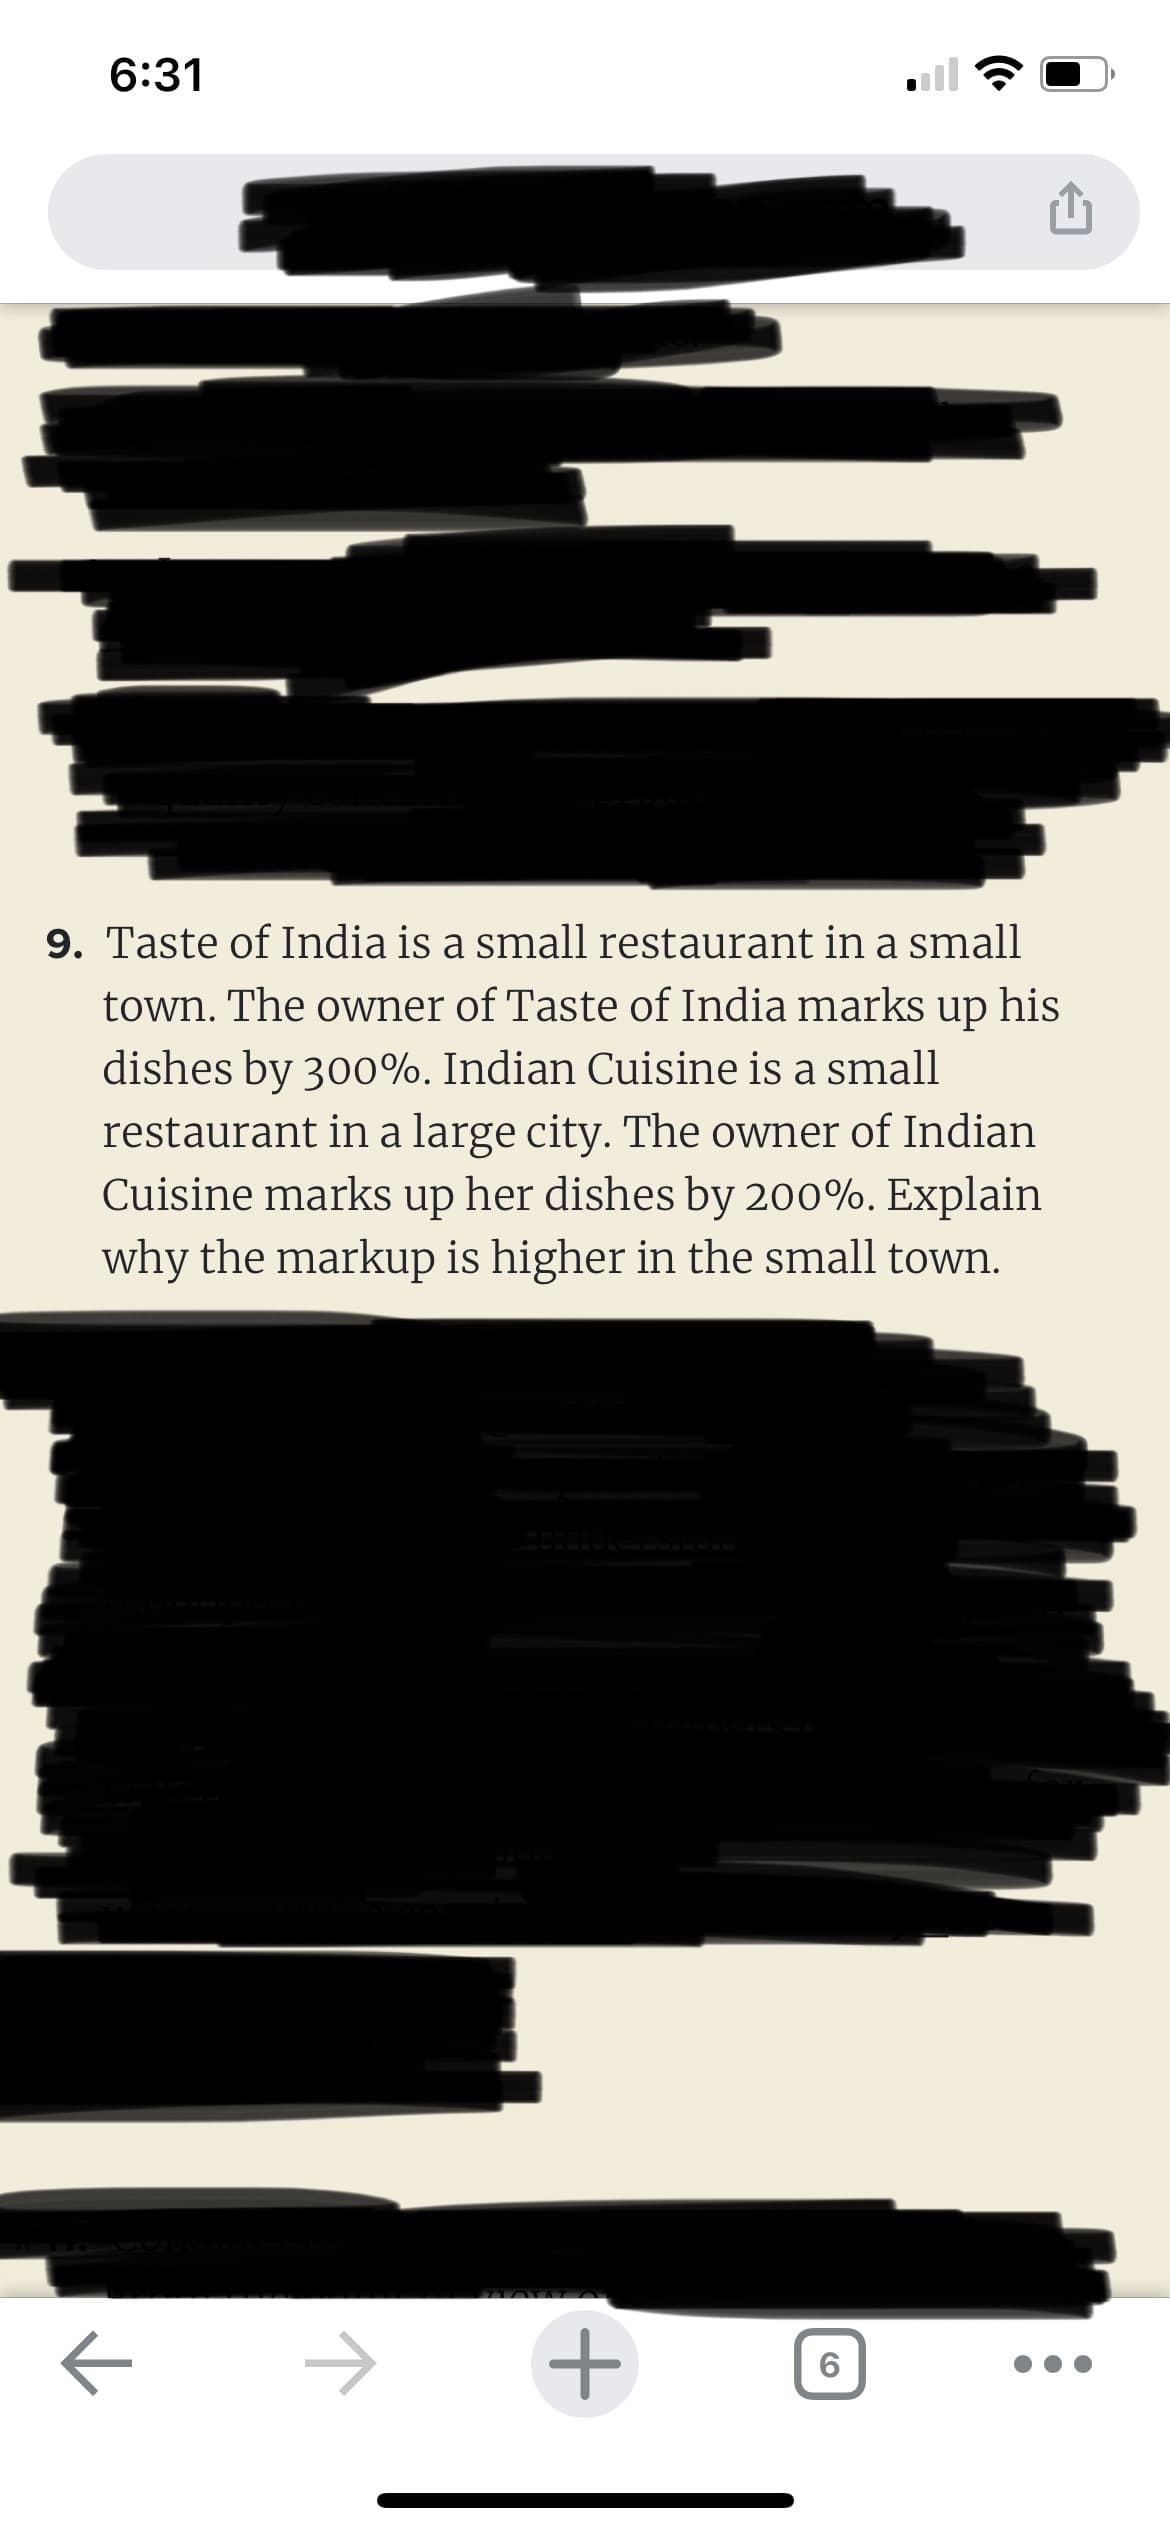 6:31
9. Taste of India is a small restaurant in a small
town. The owner of Taste of India marks up his
dishes by 300%. Indian Cuisine is a small
restaurant in a large city. The owner of Indian
Cuisine marks up her dishes by 200%. Explain
why the markup is higher in the small town.
к
+
6